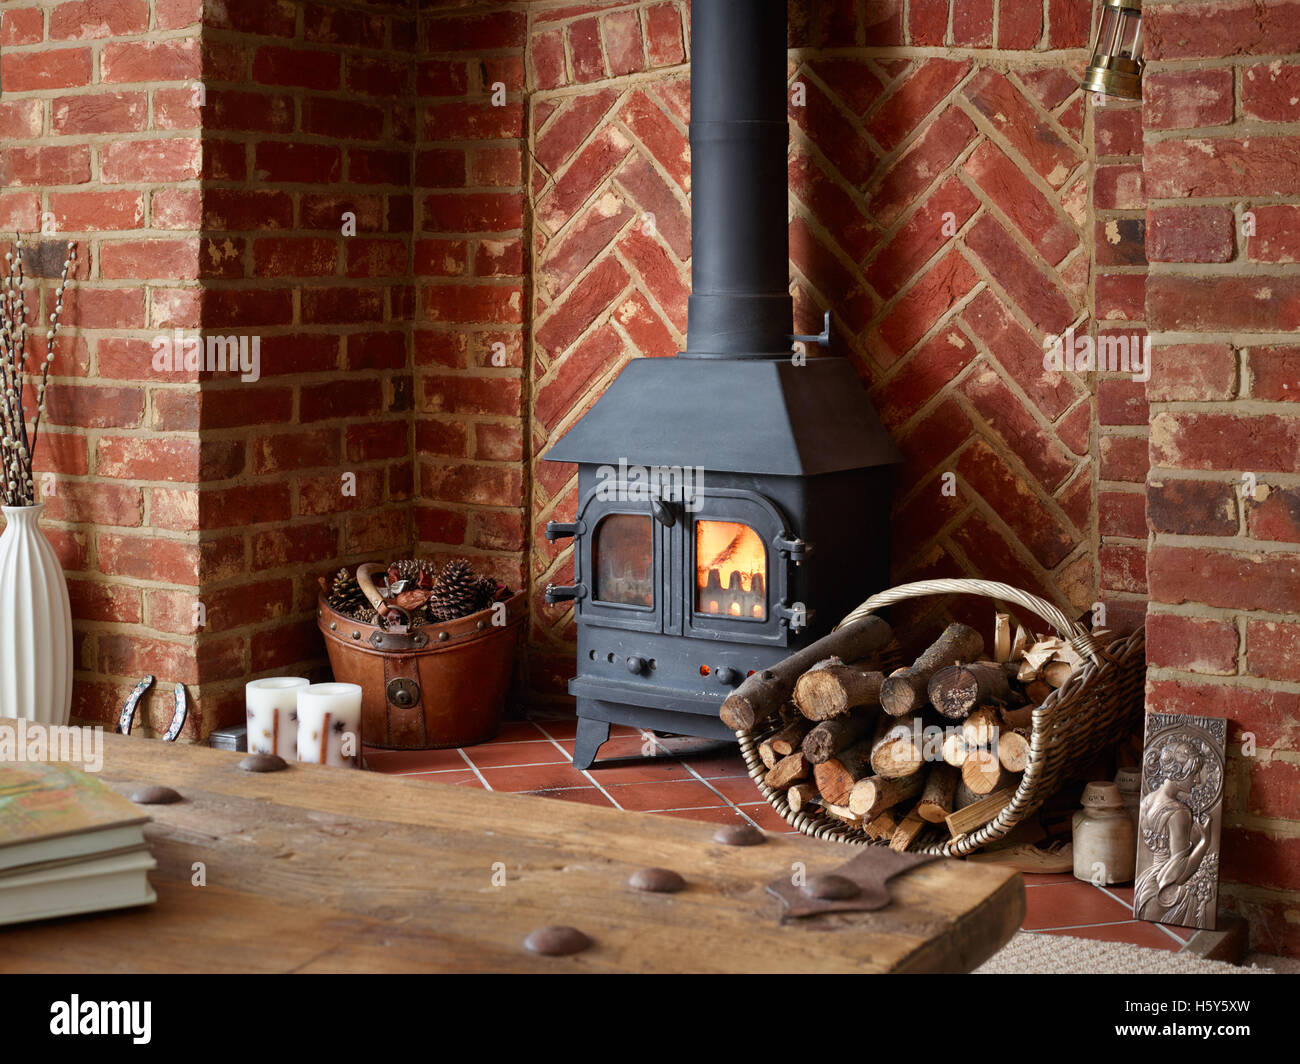 A homely, lifestyle view of a woodburner in a large brick fireplace in a country home Stock Photo